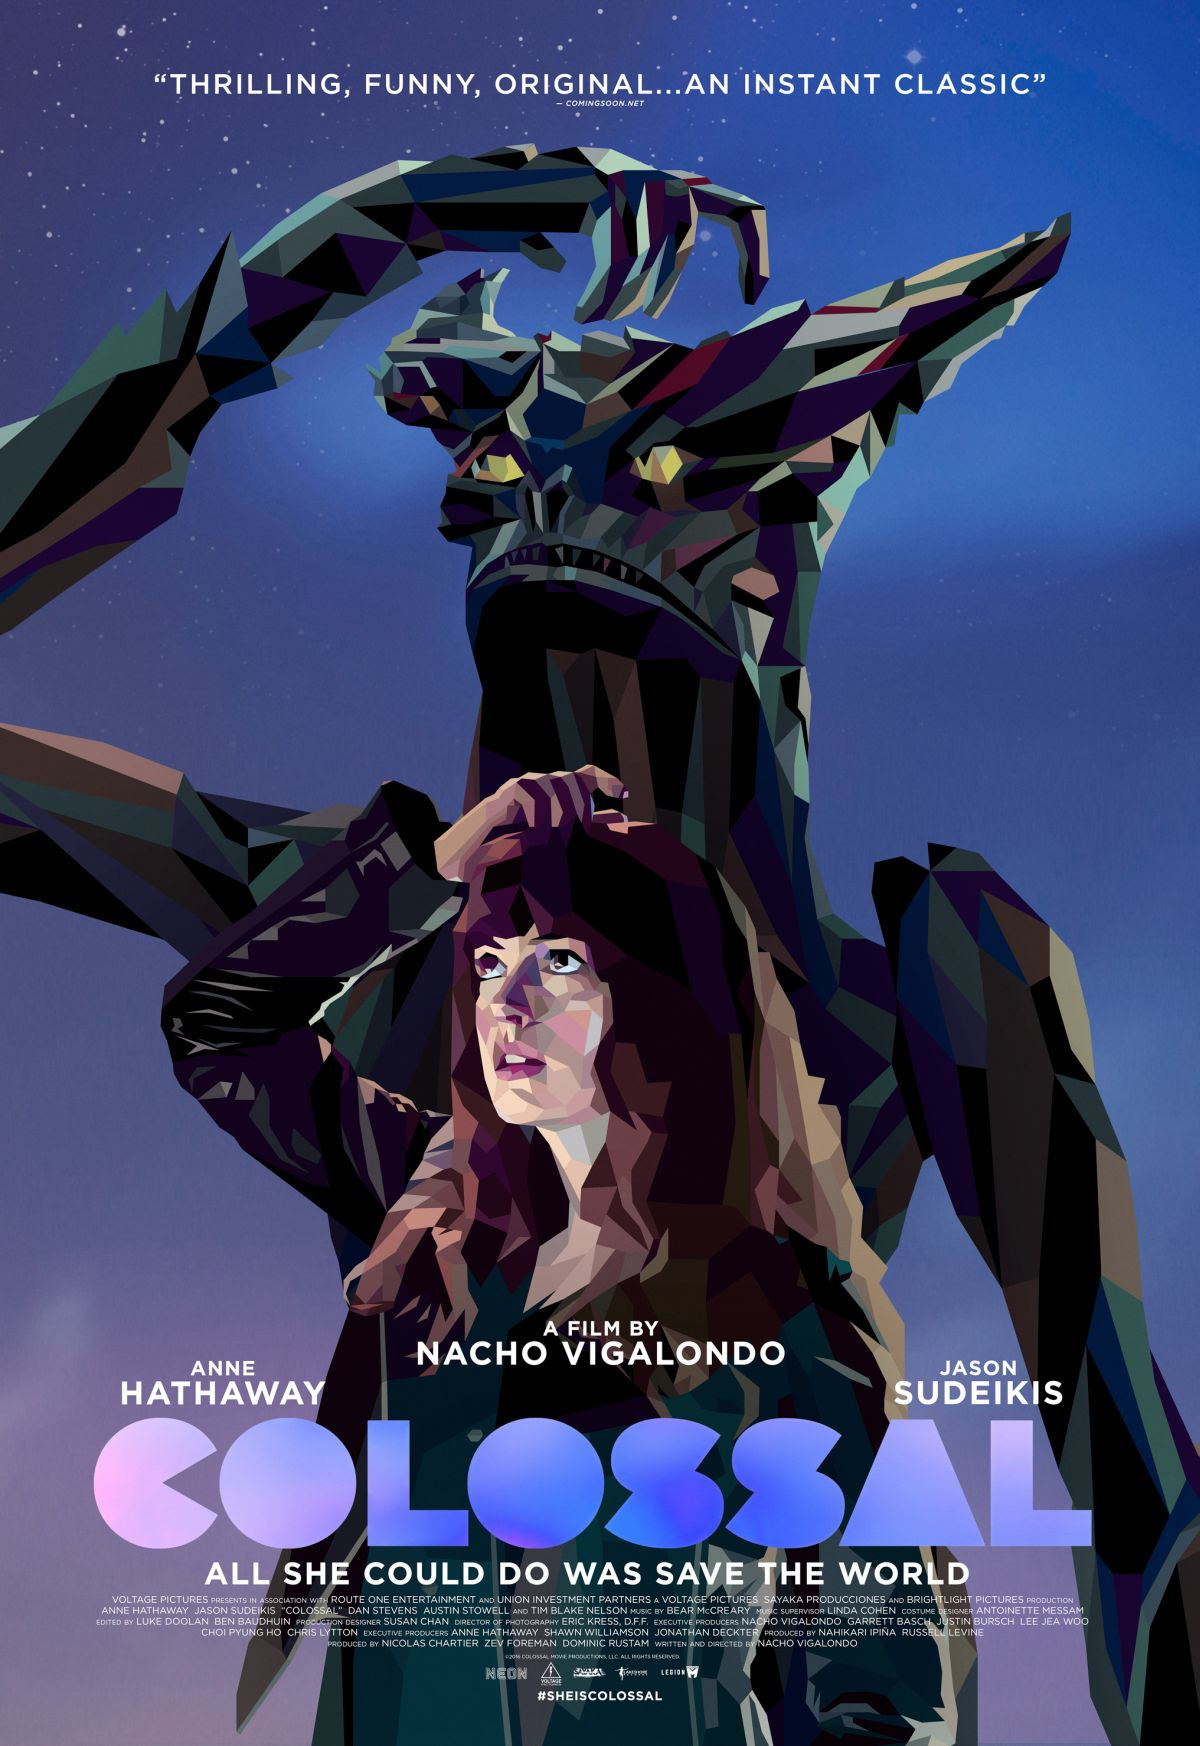 ‘Colossal’ portrays relationships with a Kaiju twist